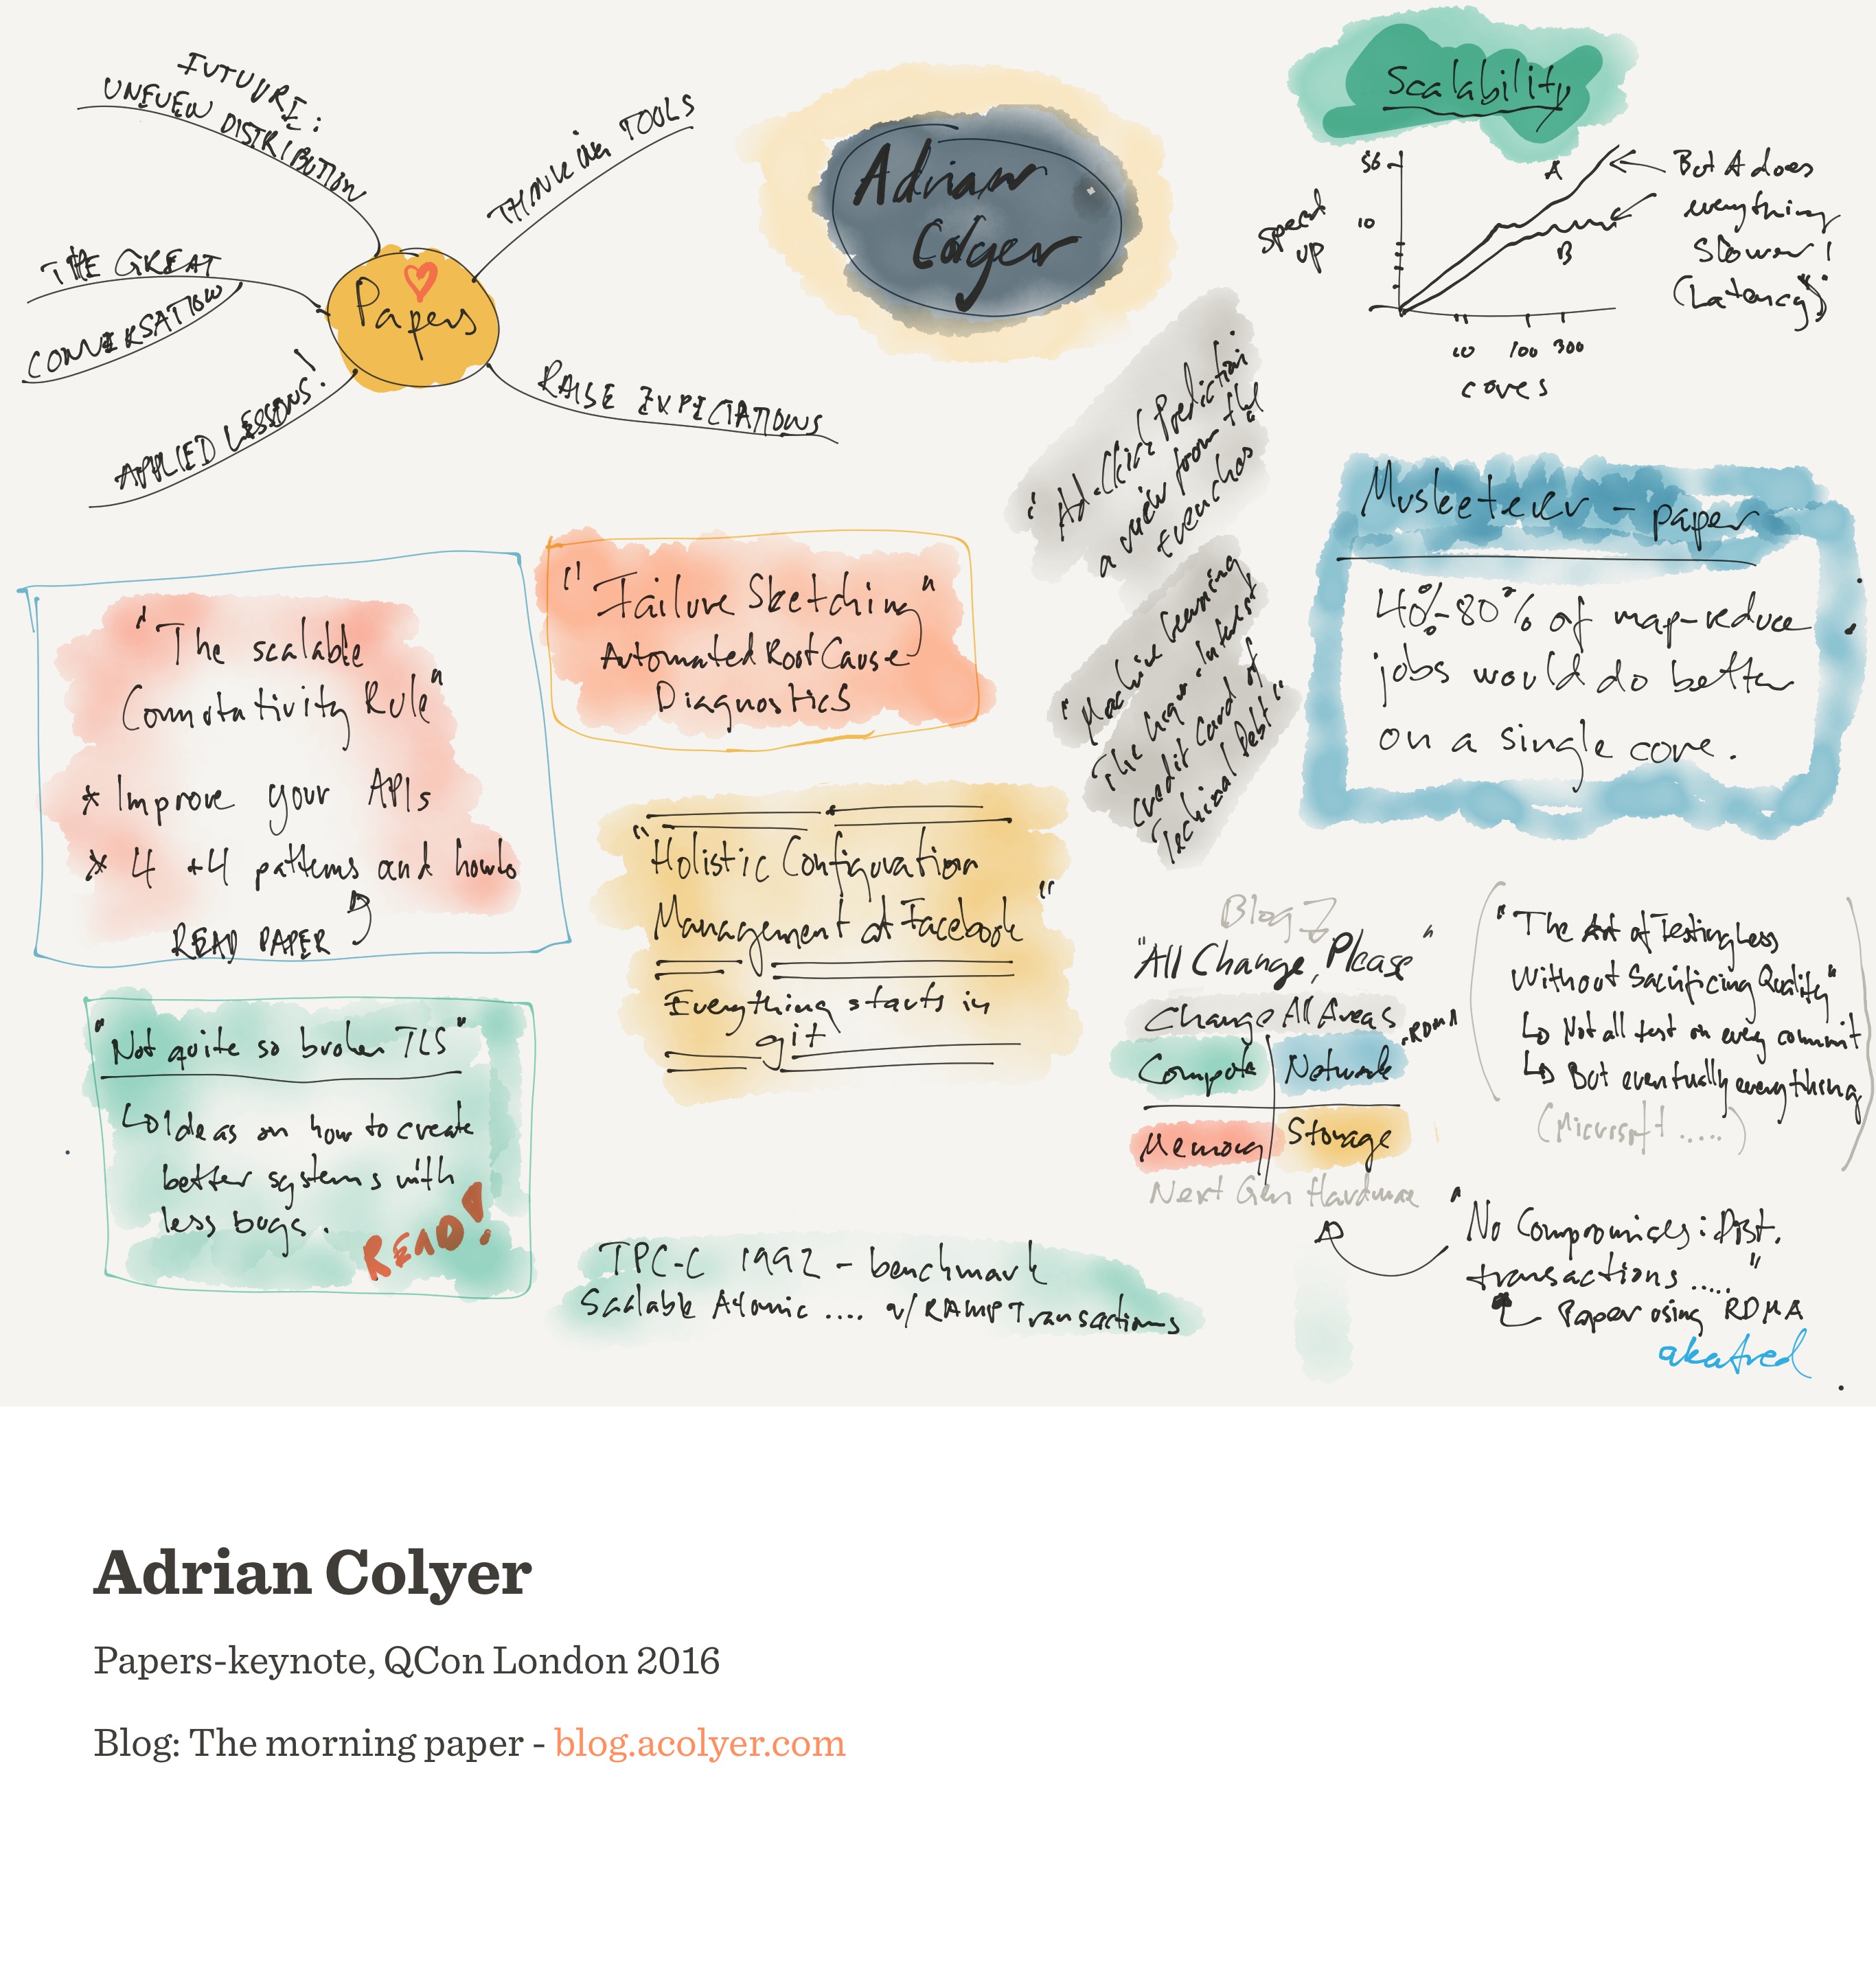 Notes from Unevenly Distributed (Adrian Colyer)